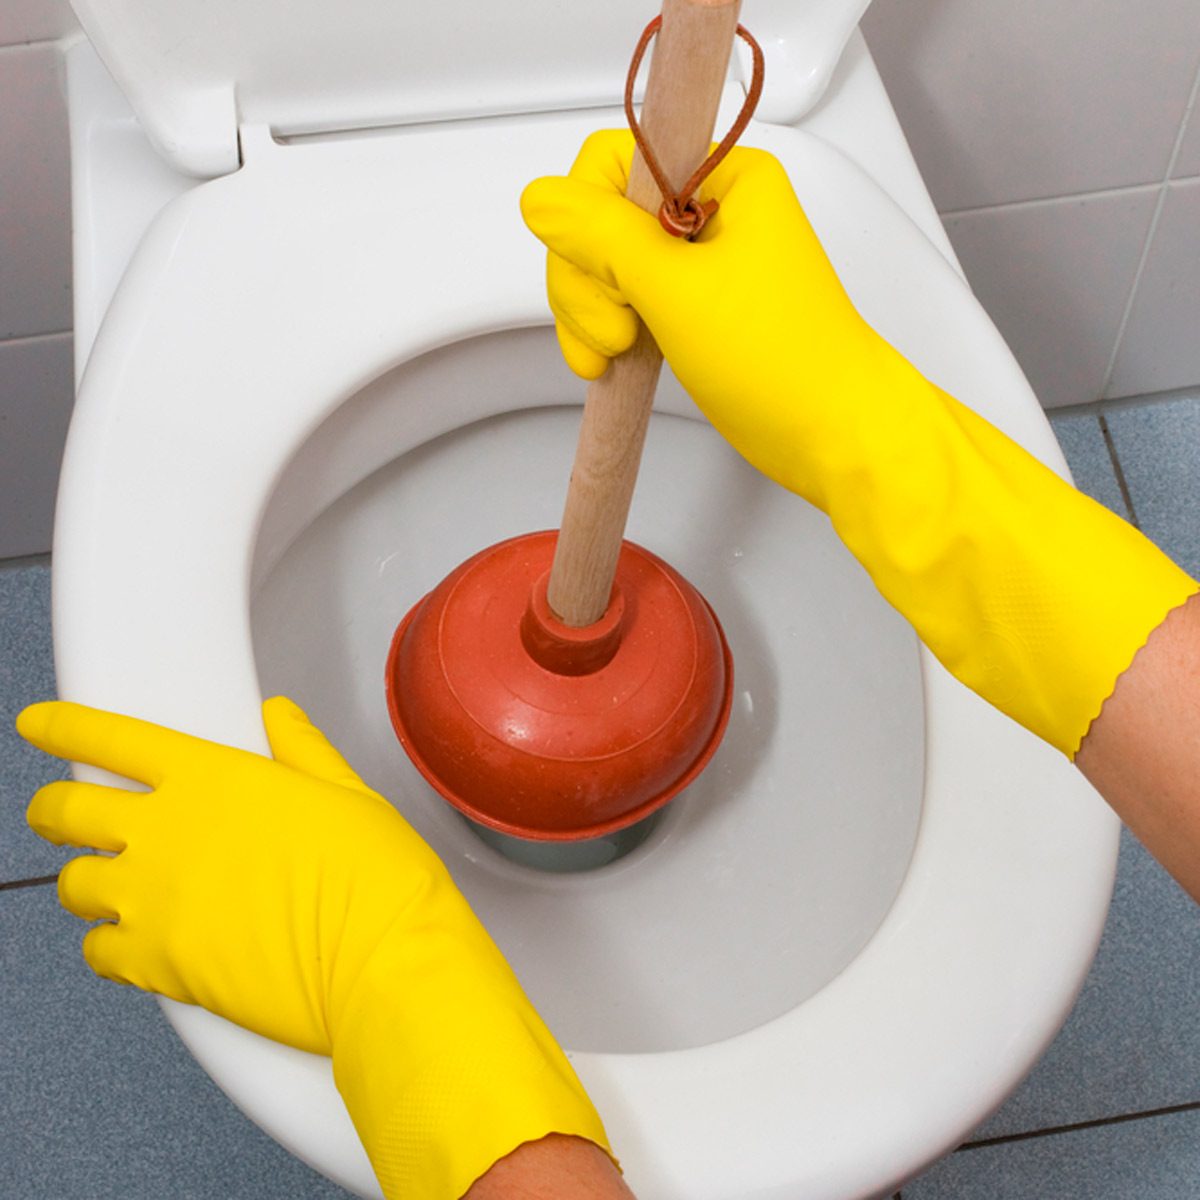 How to Use a Plunger to Unclog a Toilet or Drain